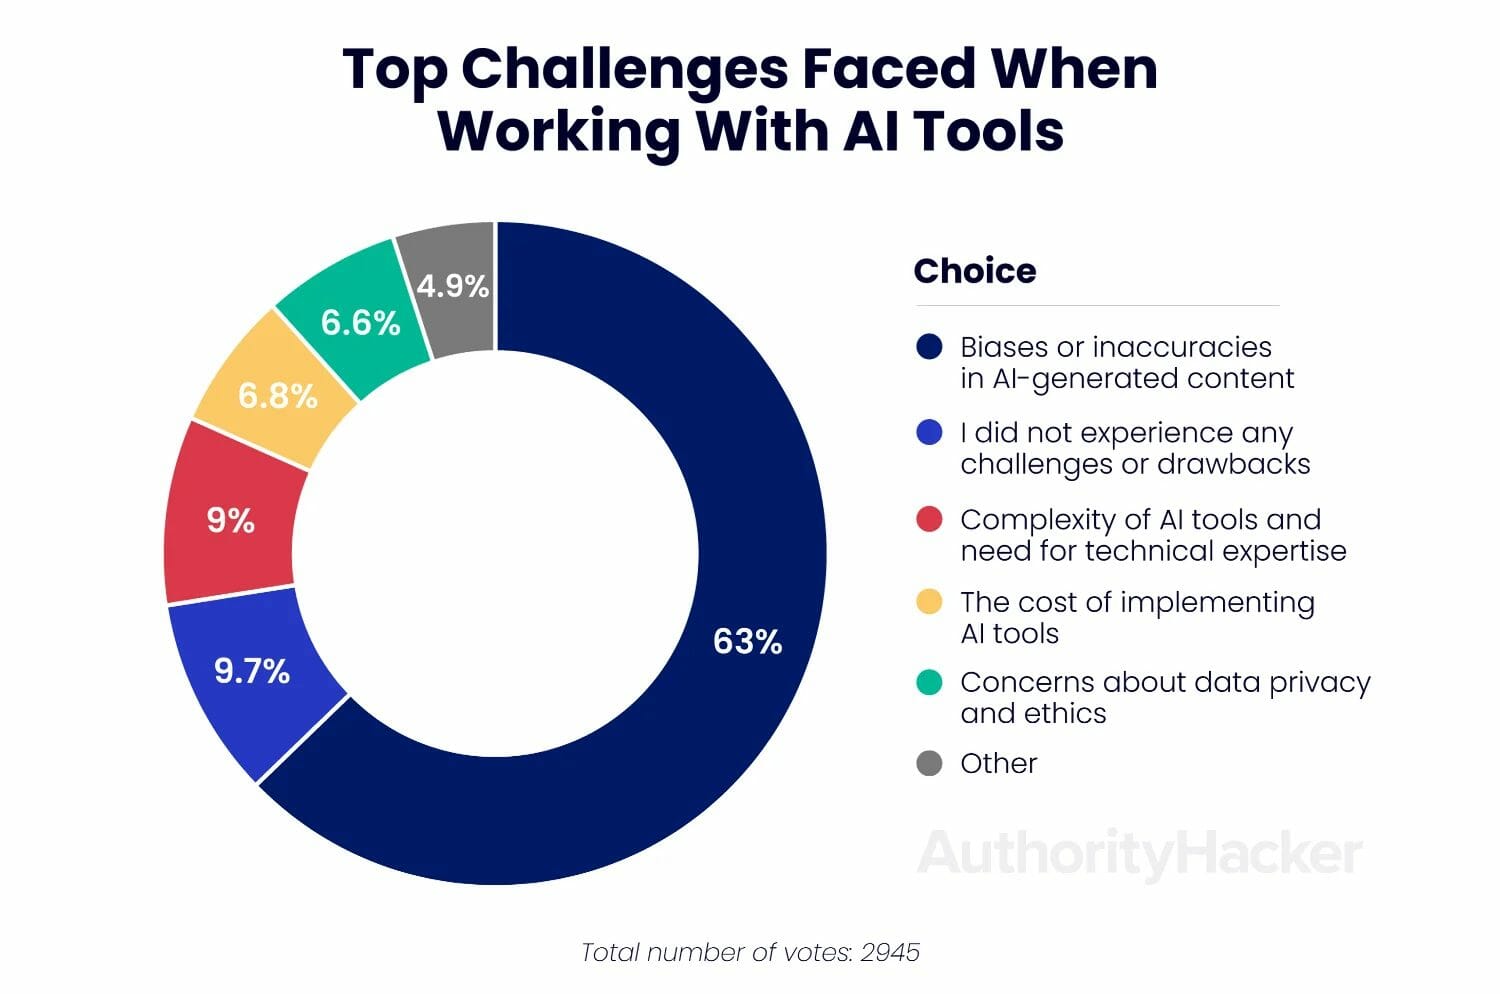 Top Challenges Faced When Working with AI Tools